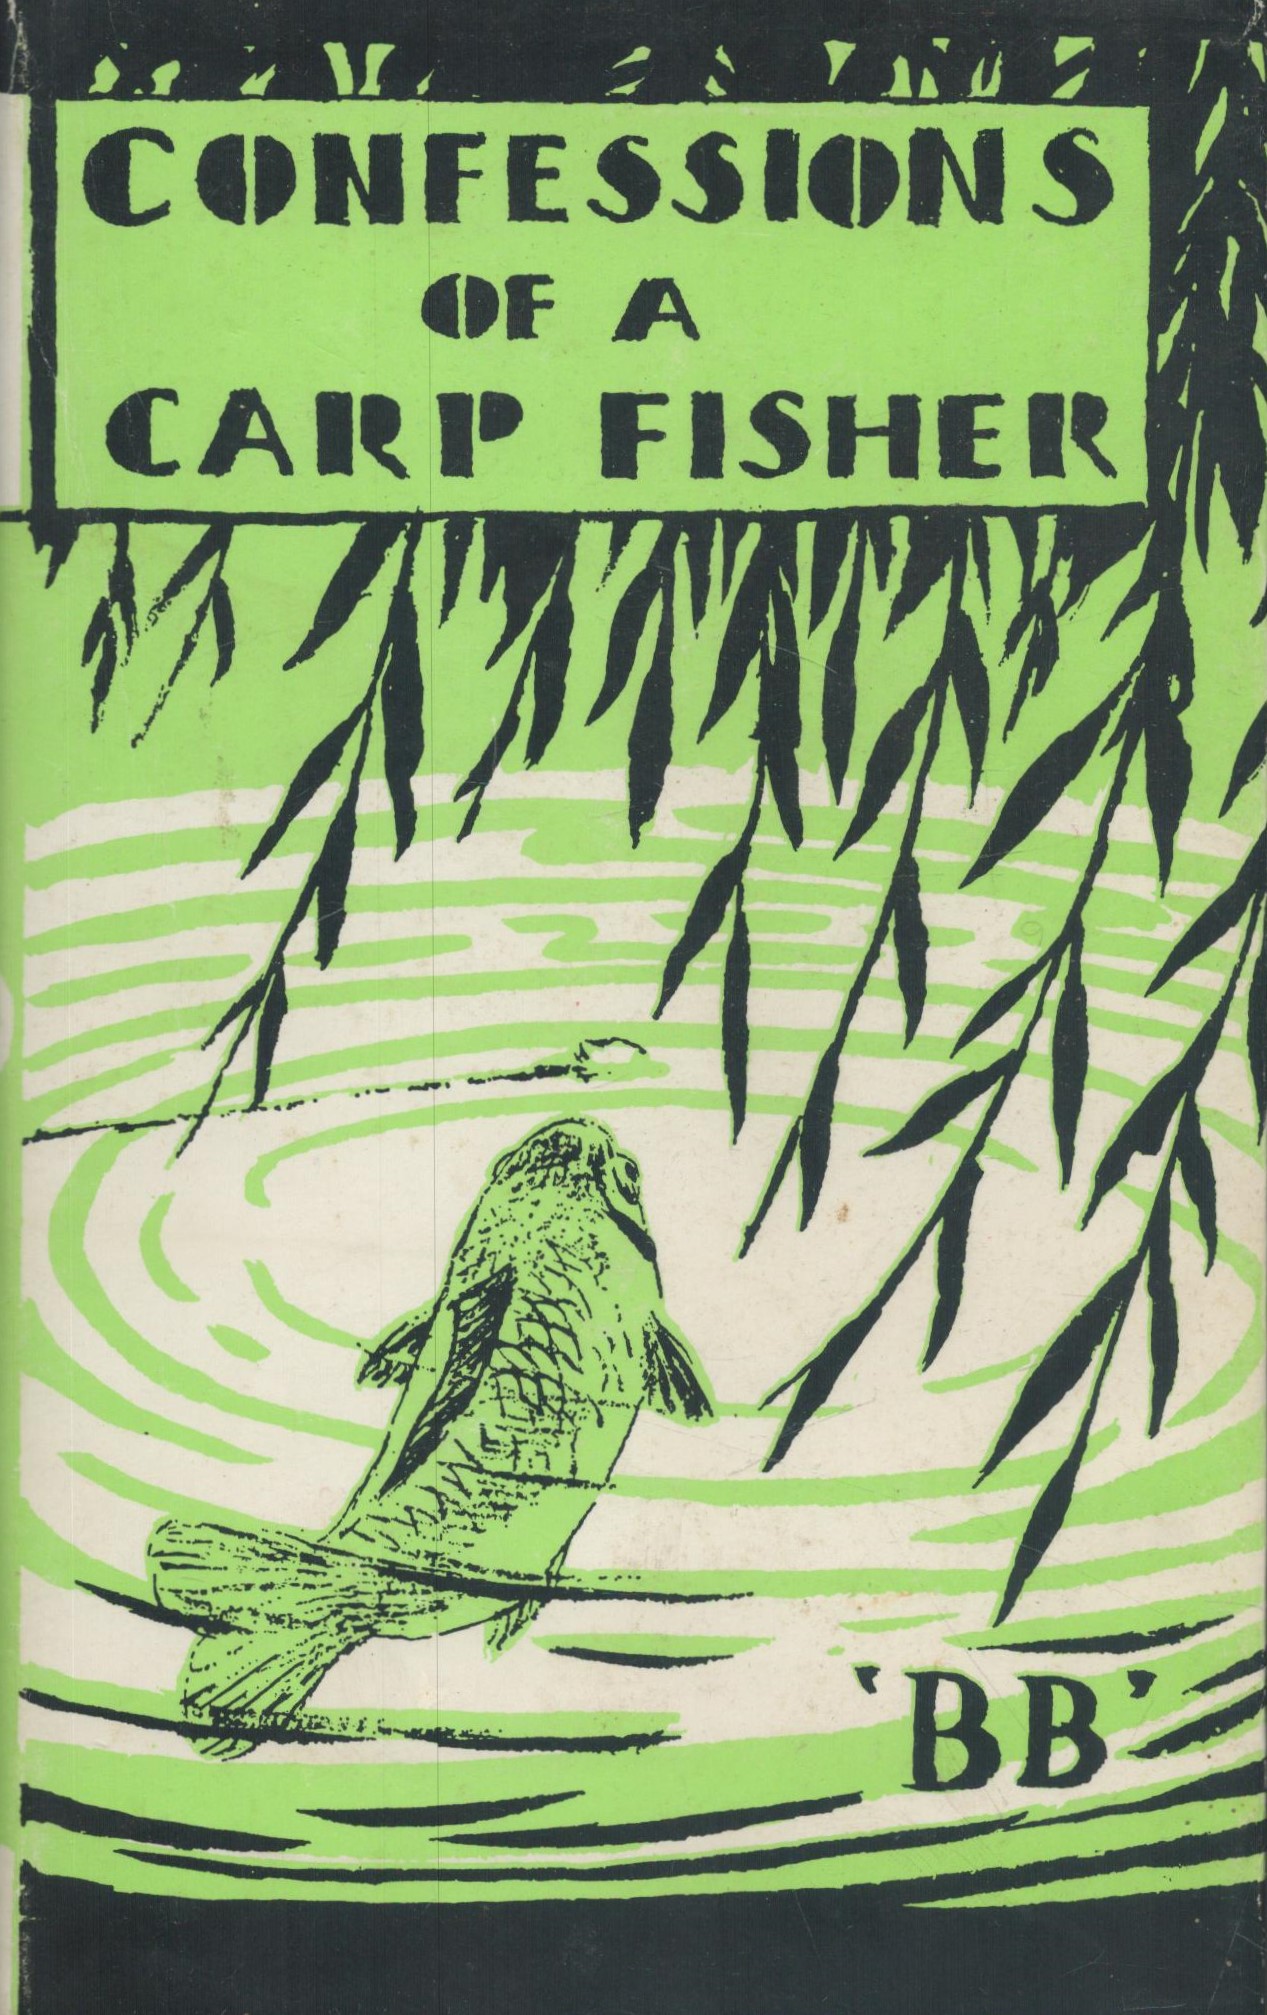 Confessions of a Carp Fisher. By 'BB'. Illustrated by Denys Watkins Pitchford, F. R. S. A. , A. R.